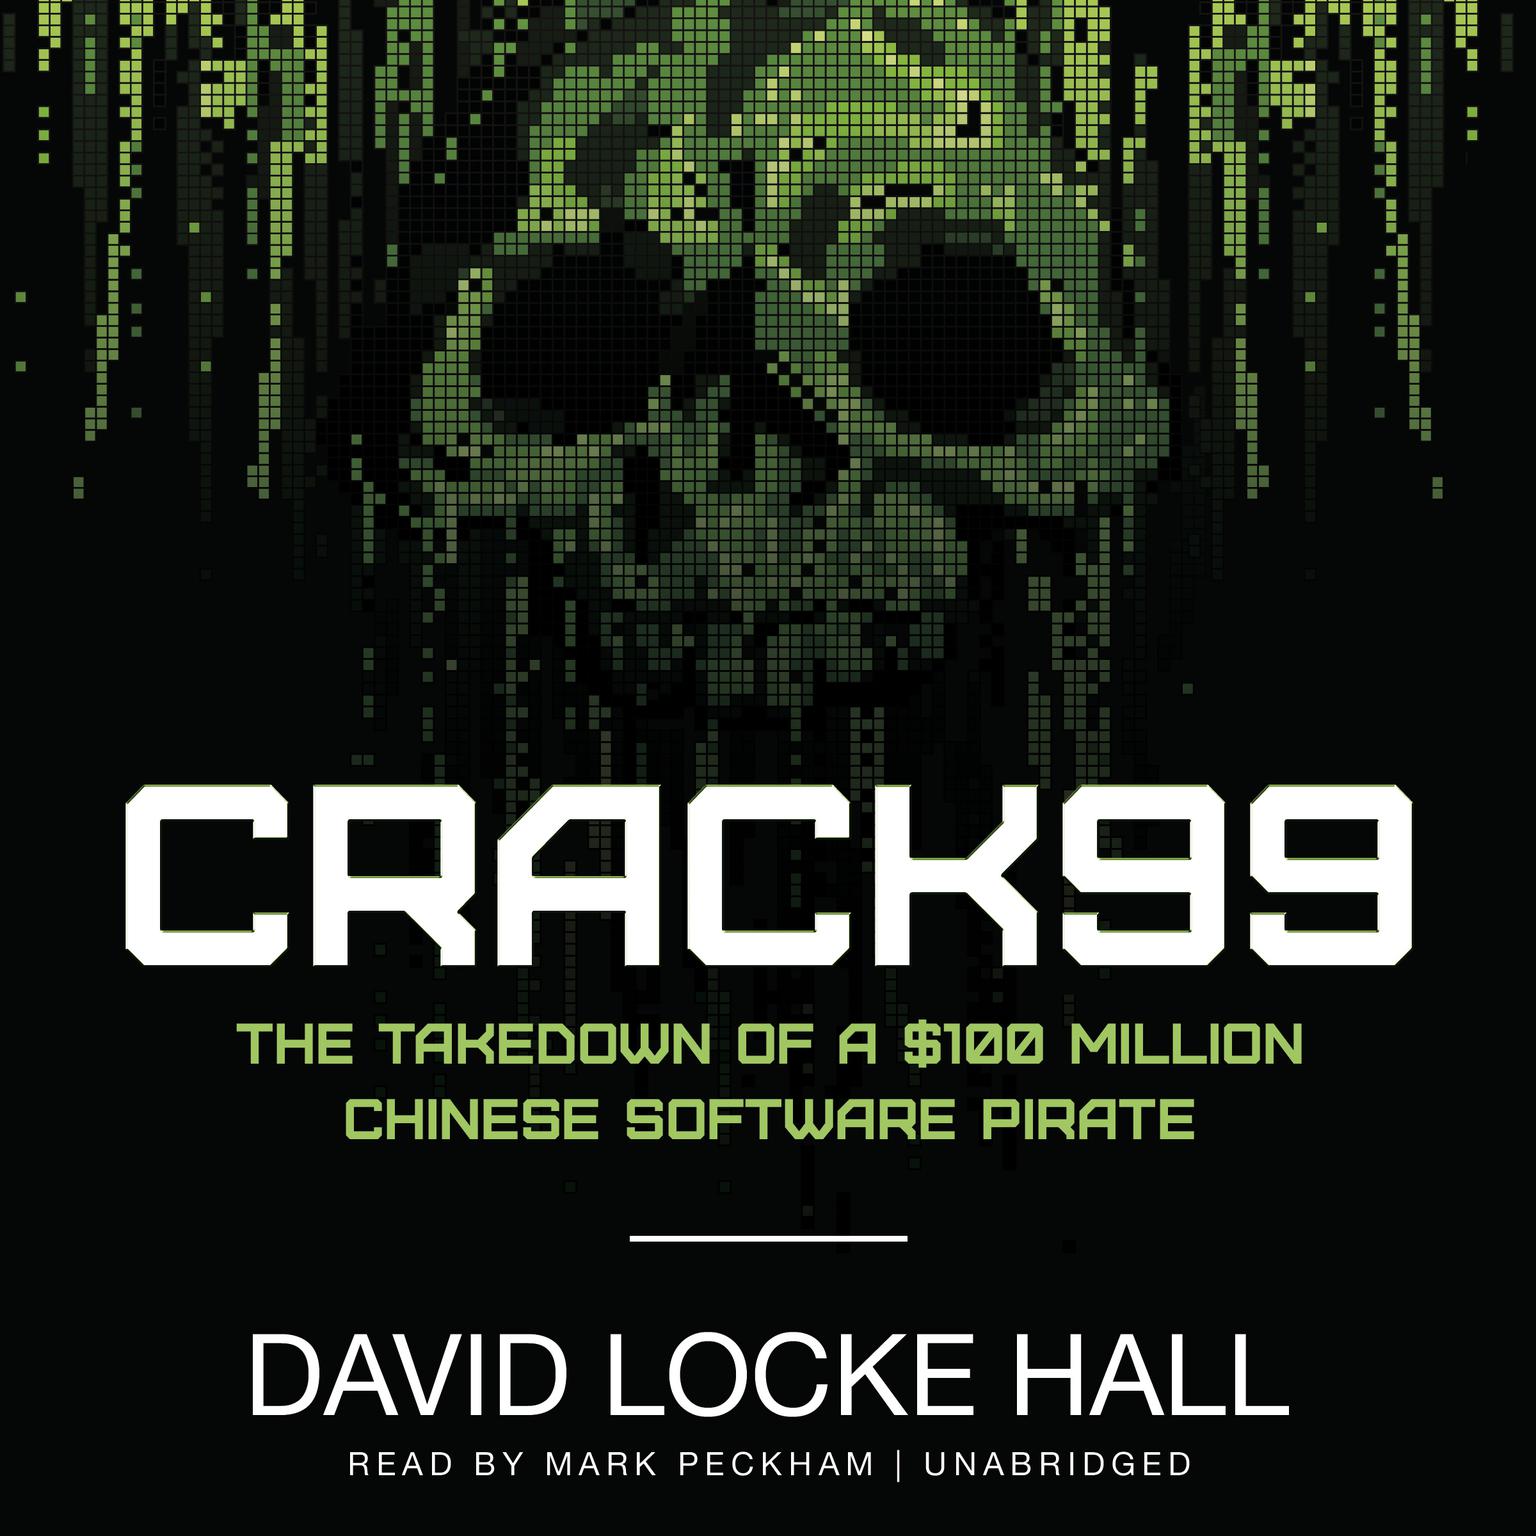 CRACK99: The Takedown of a $100 Million Chinese Software Pirate Audiobook, by David Locke Hall